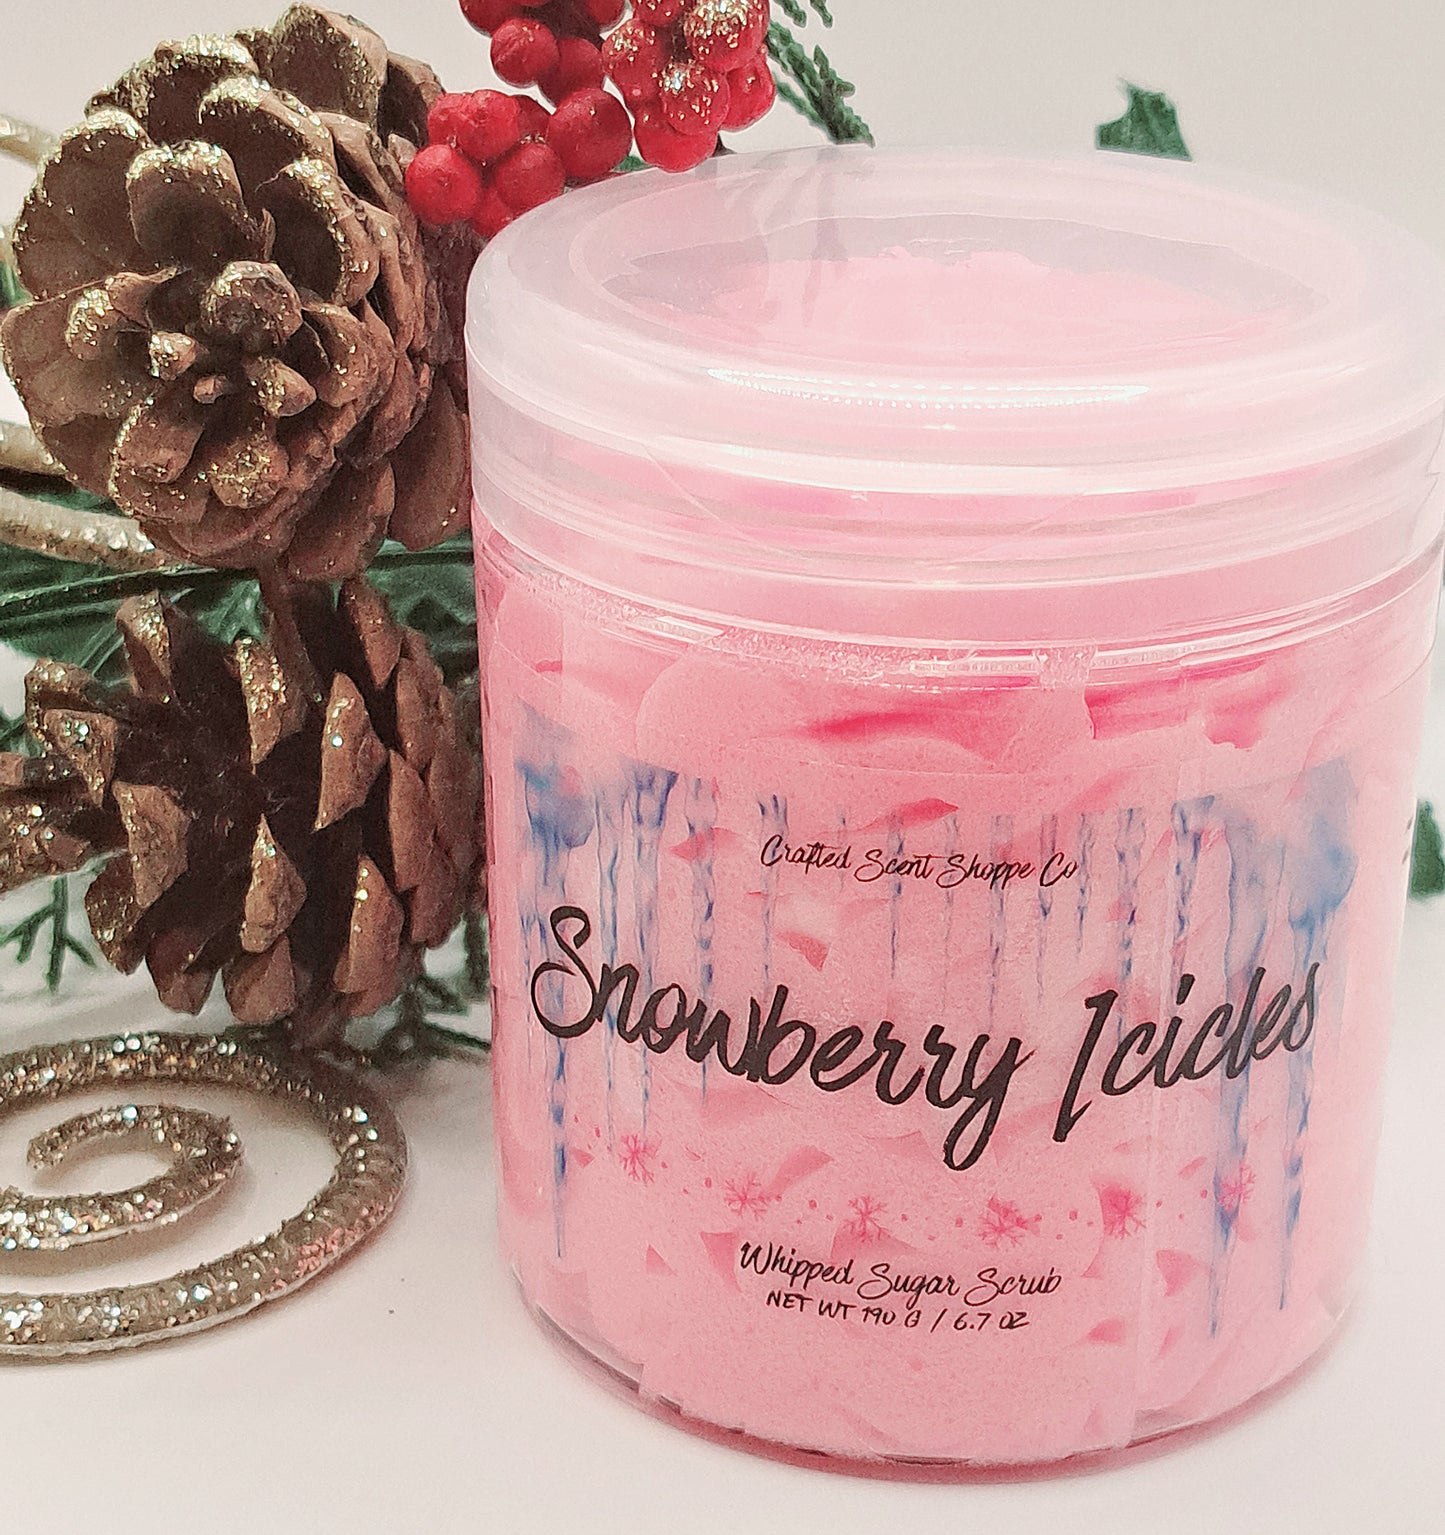 Snowberry Icicles Whipped Sugar Scrub